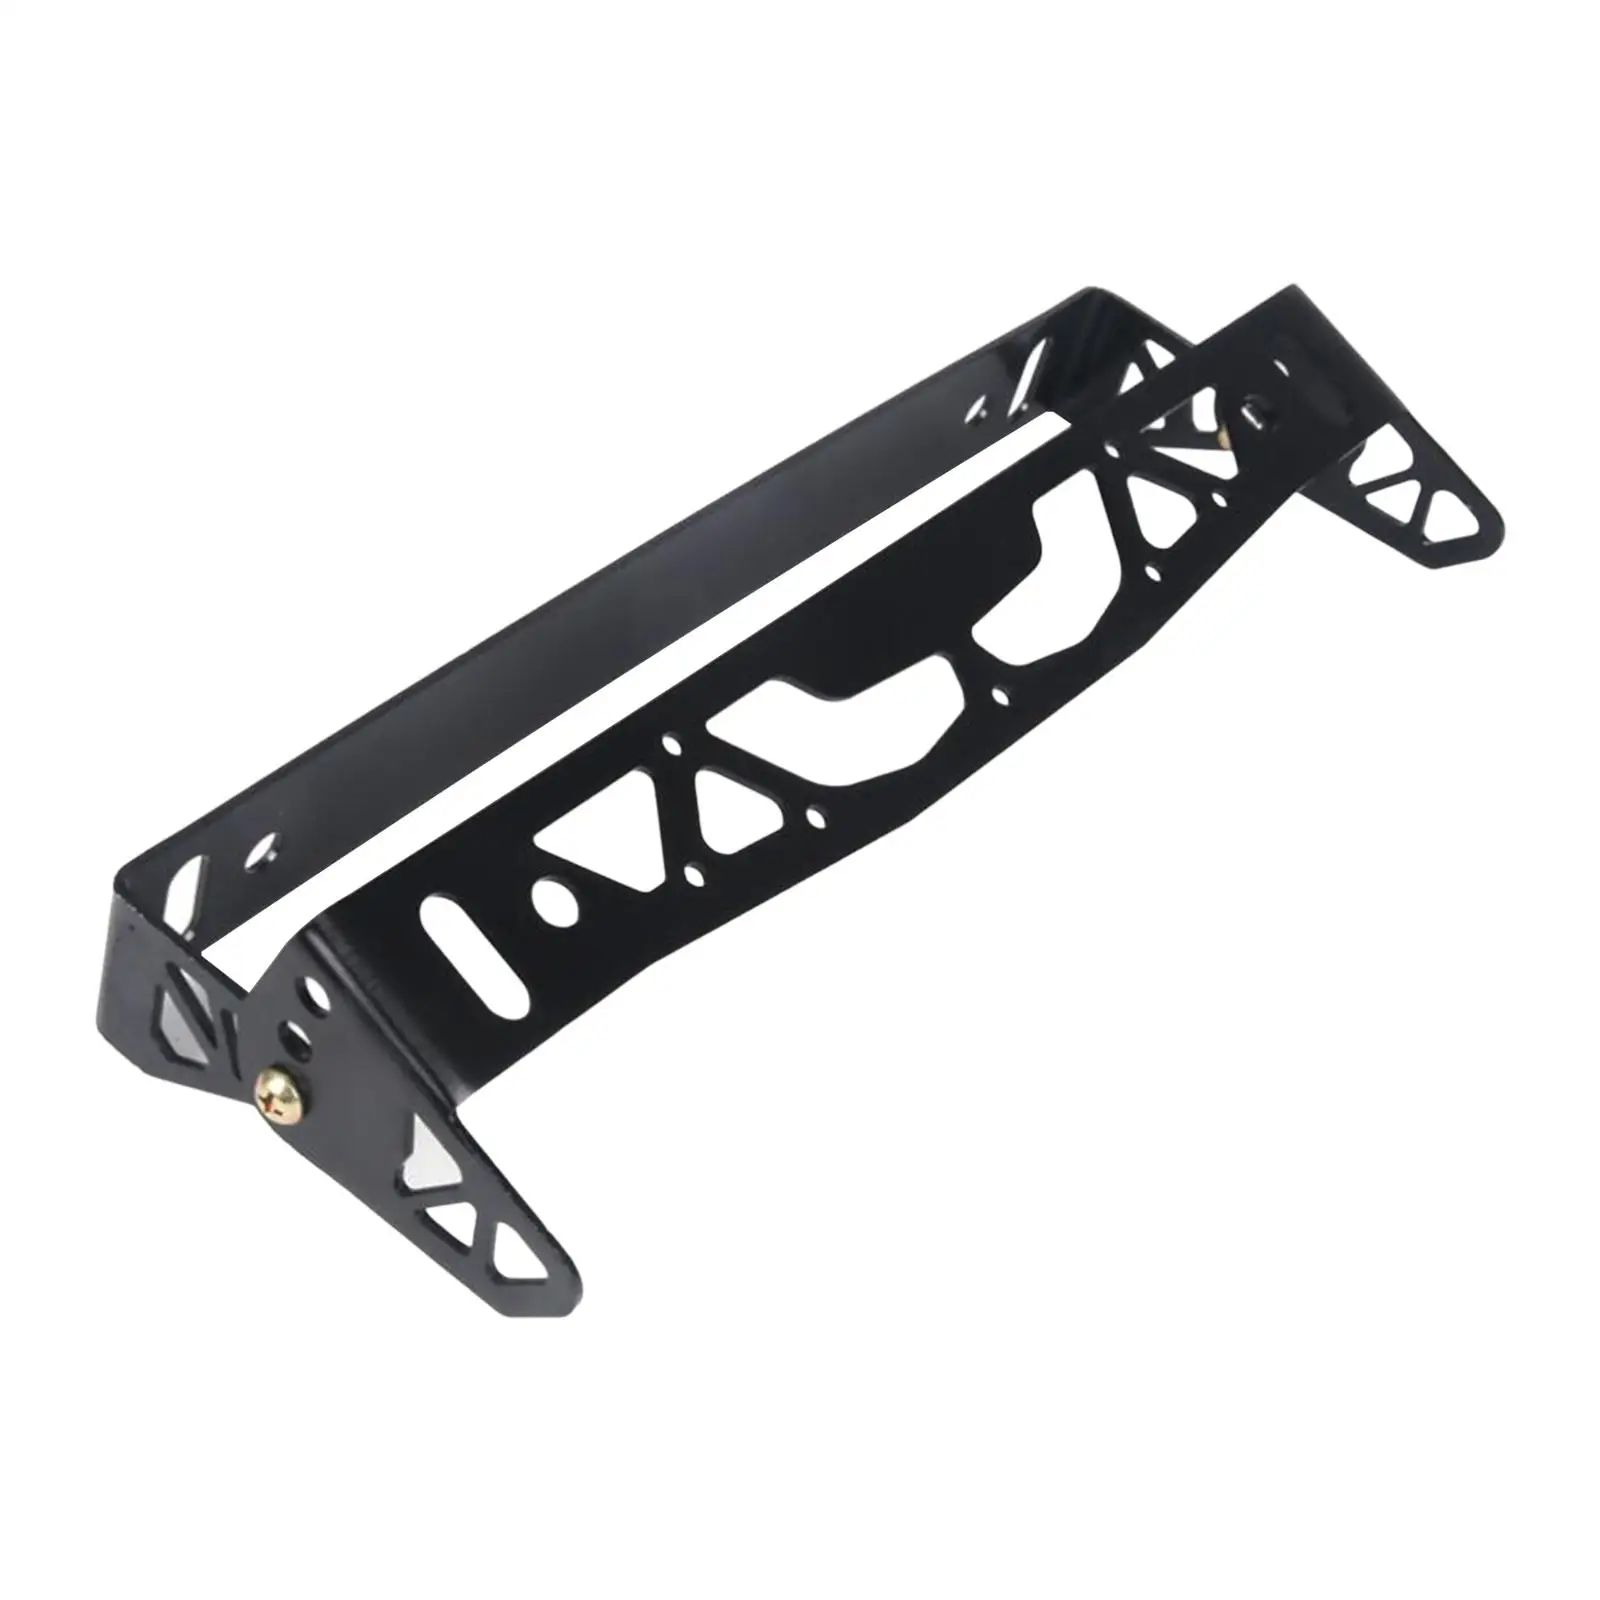 License Plate Frame Holder Registration Plate Tag Holder Assembly Replaces Spare Parts Car Front License Plate Mount Accessories